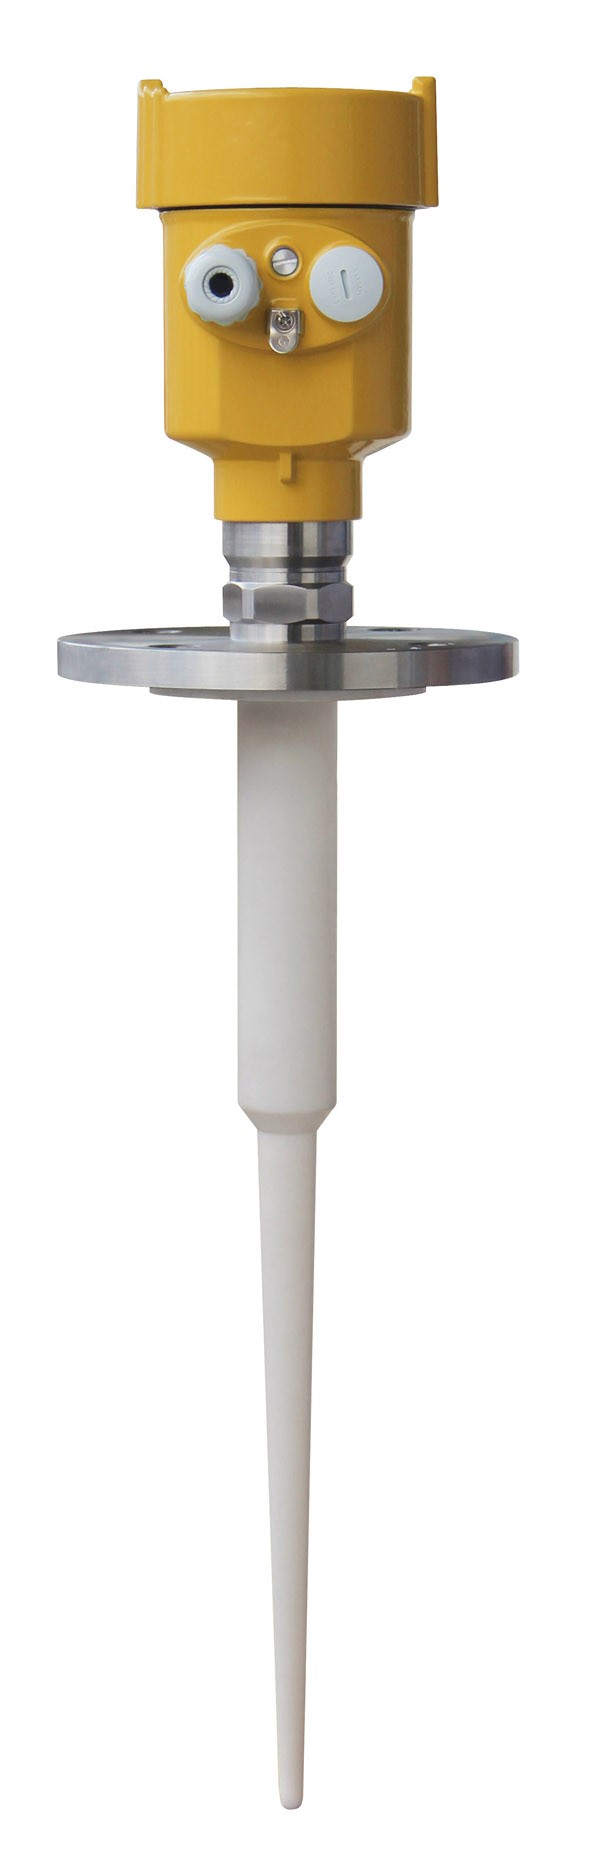 KAIDI high-quality guided wave radar level transmitter principle of operation suppliers for work-4